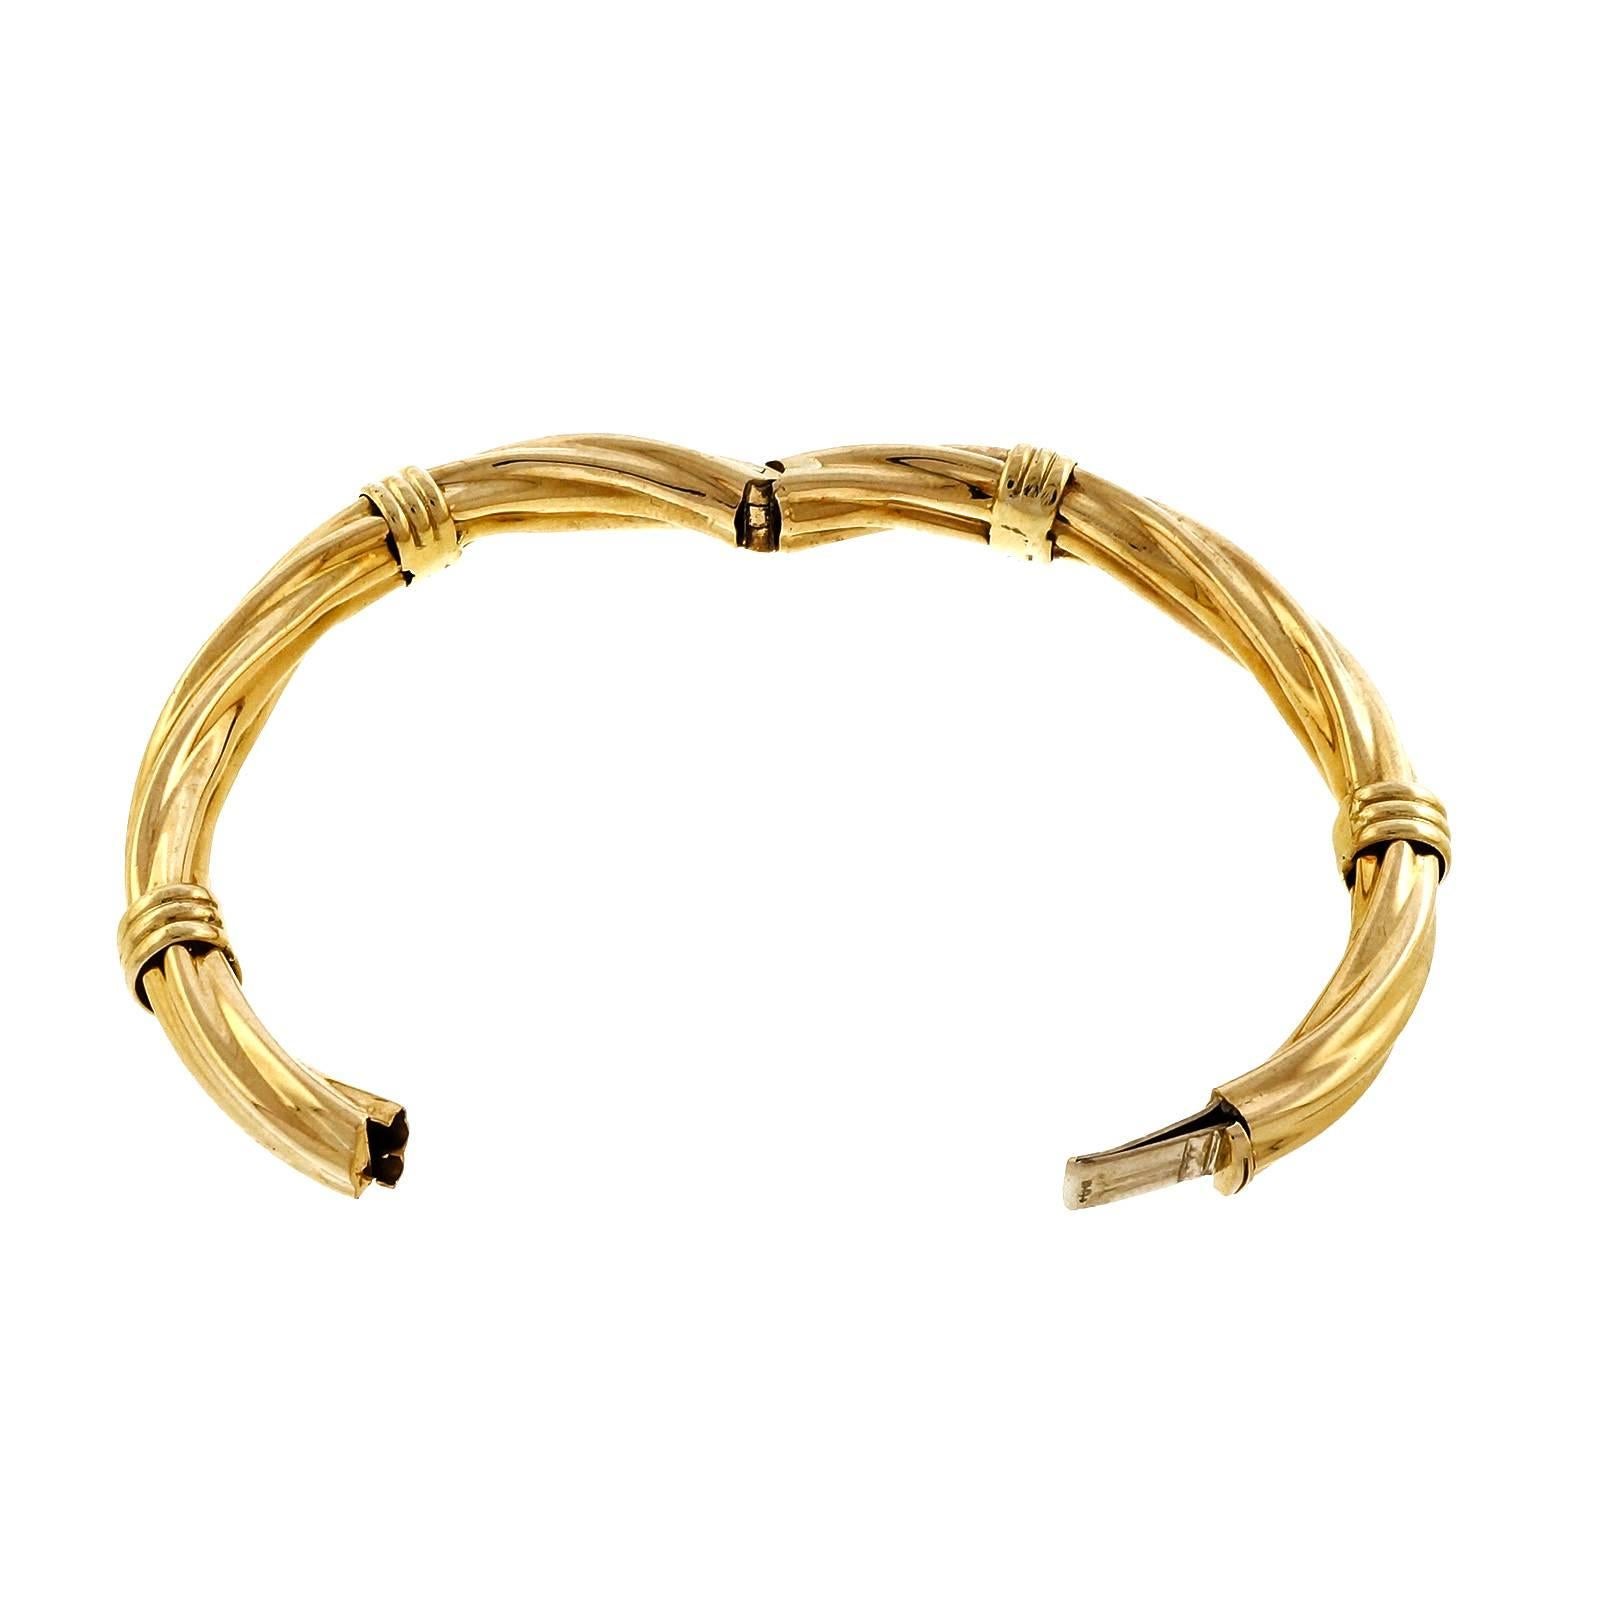 1970 18k gold 10mm wide twisted style hinged bangle bracelet with four triple band details.

18k yellow gold
27.3 grams
Tested: 18k
Stamped: 750
Hallmark: D with an arrow through it
Inside dimensions: 2.32 x 2.02 inches
Width: 10mm
Depth: